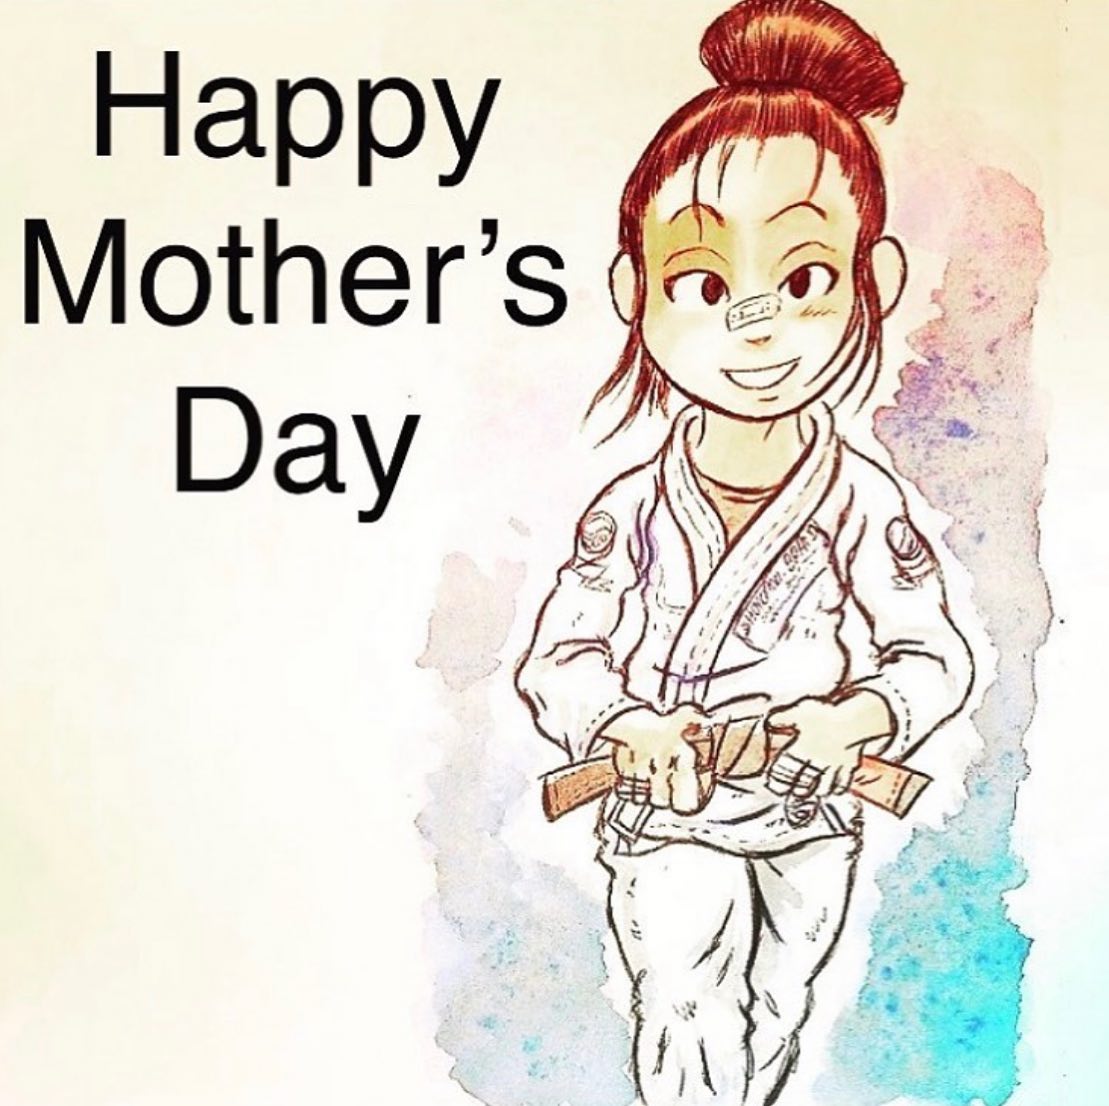 #HappyMothersDay to all the badass moms out there.